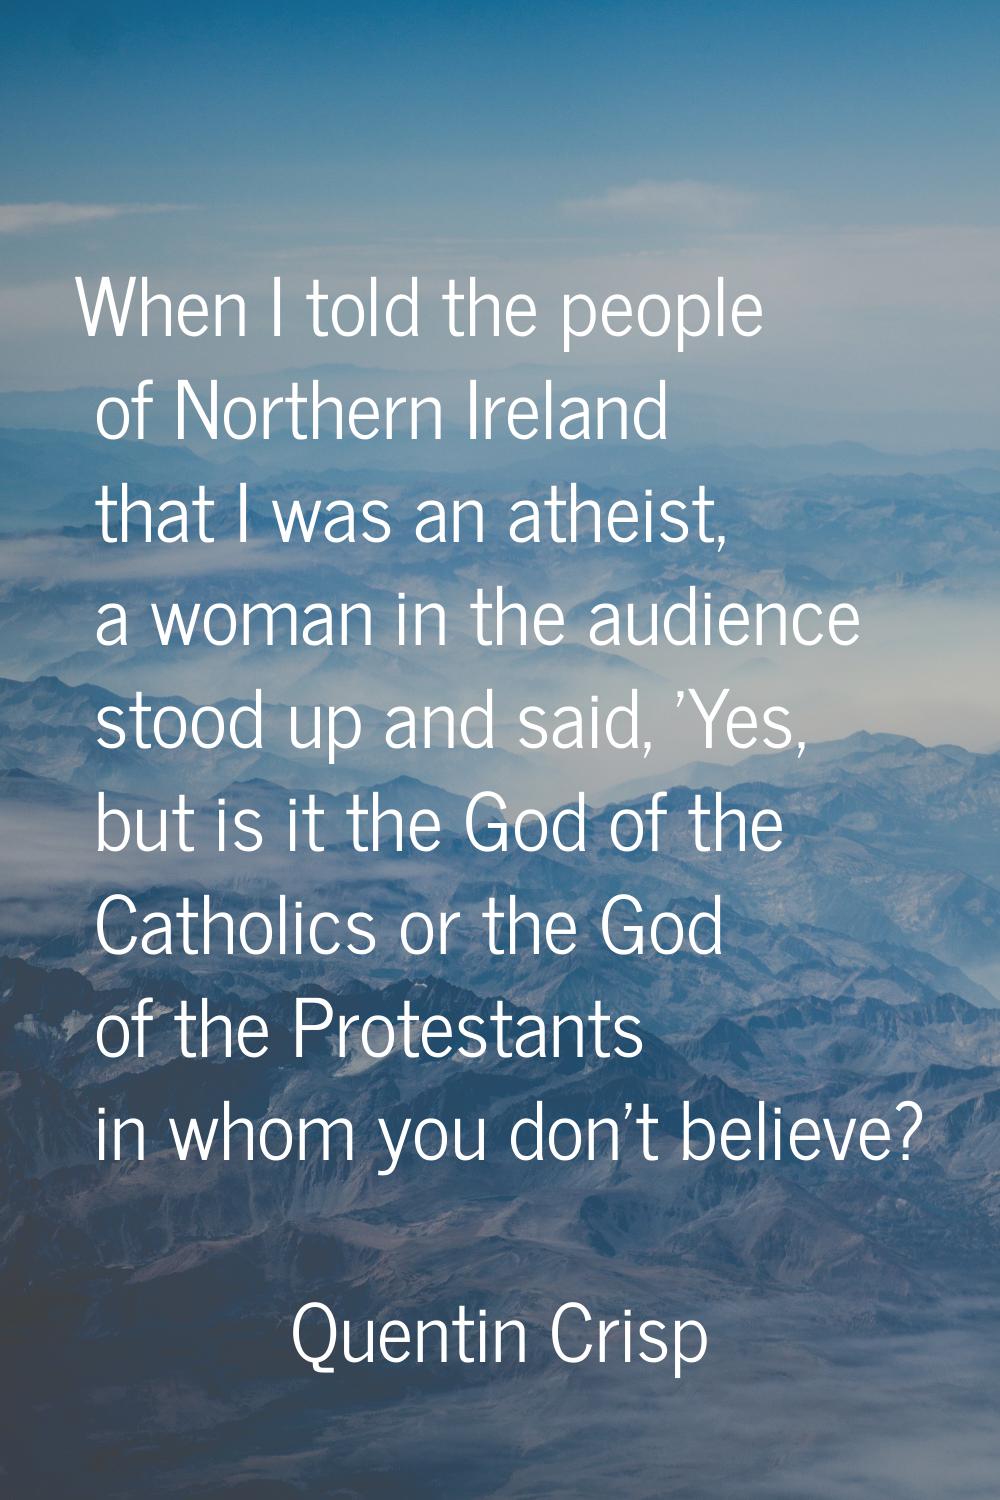 When I told the people of Northern Ireland that I was an atheist, a woman in the audience stood up 